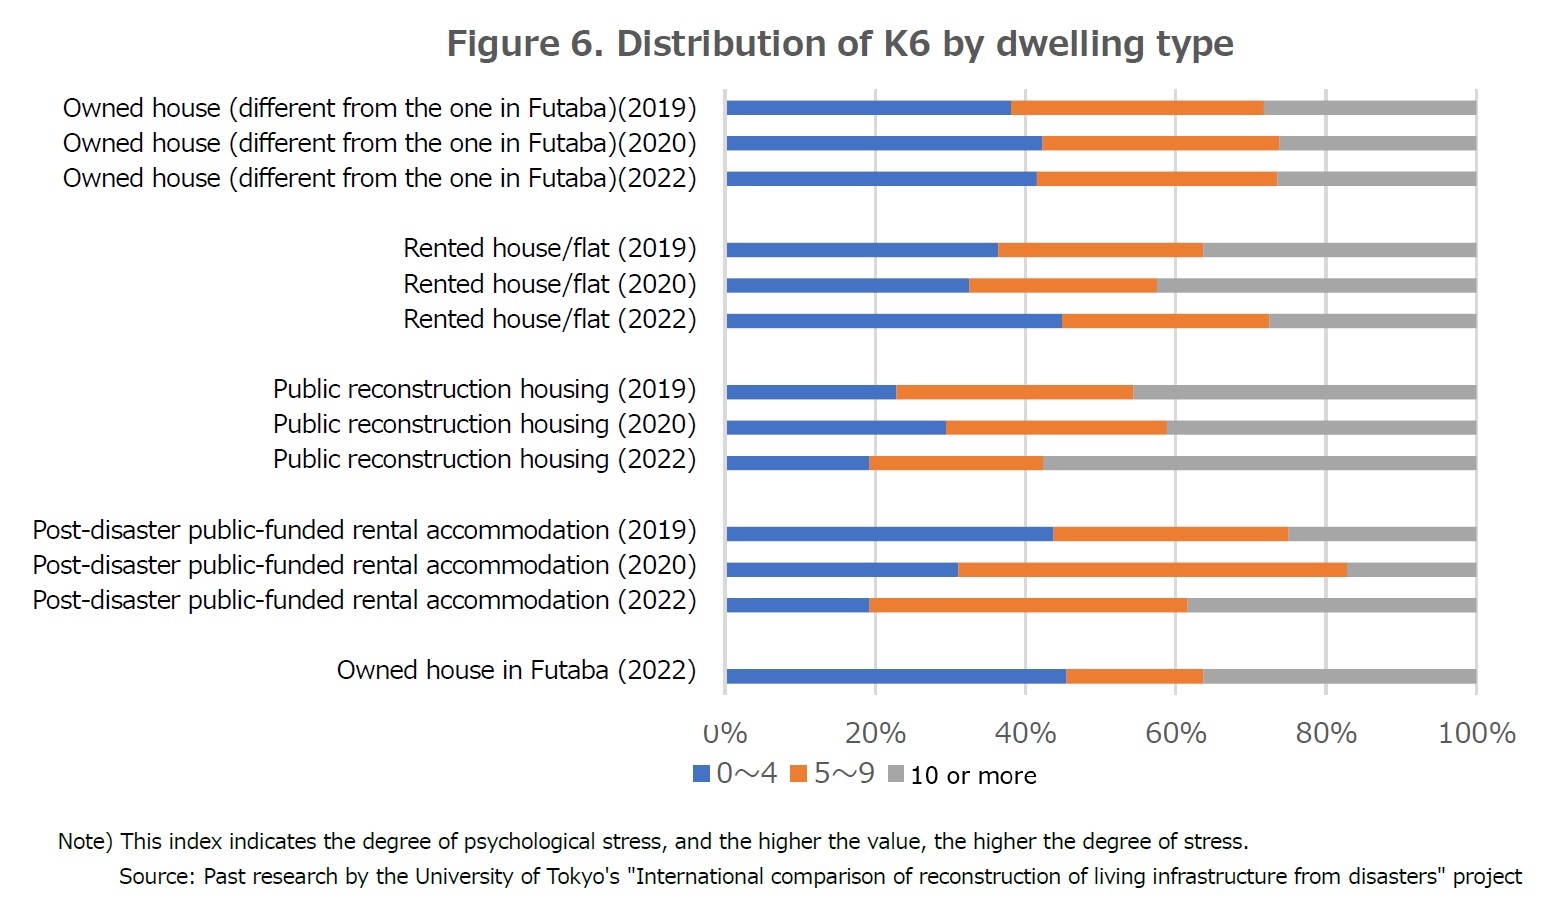 Figure 6. Distribution of K6 by dwelling type